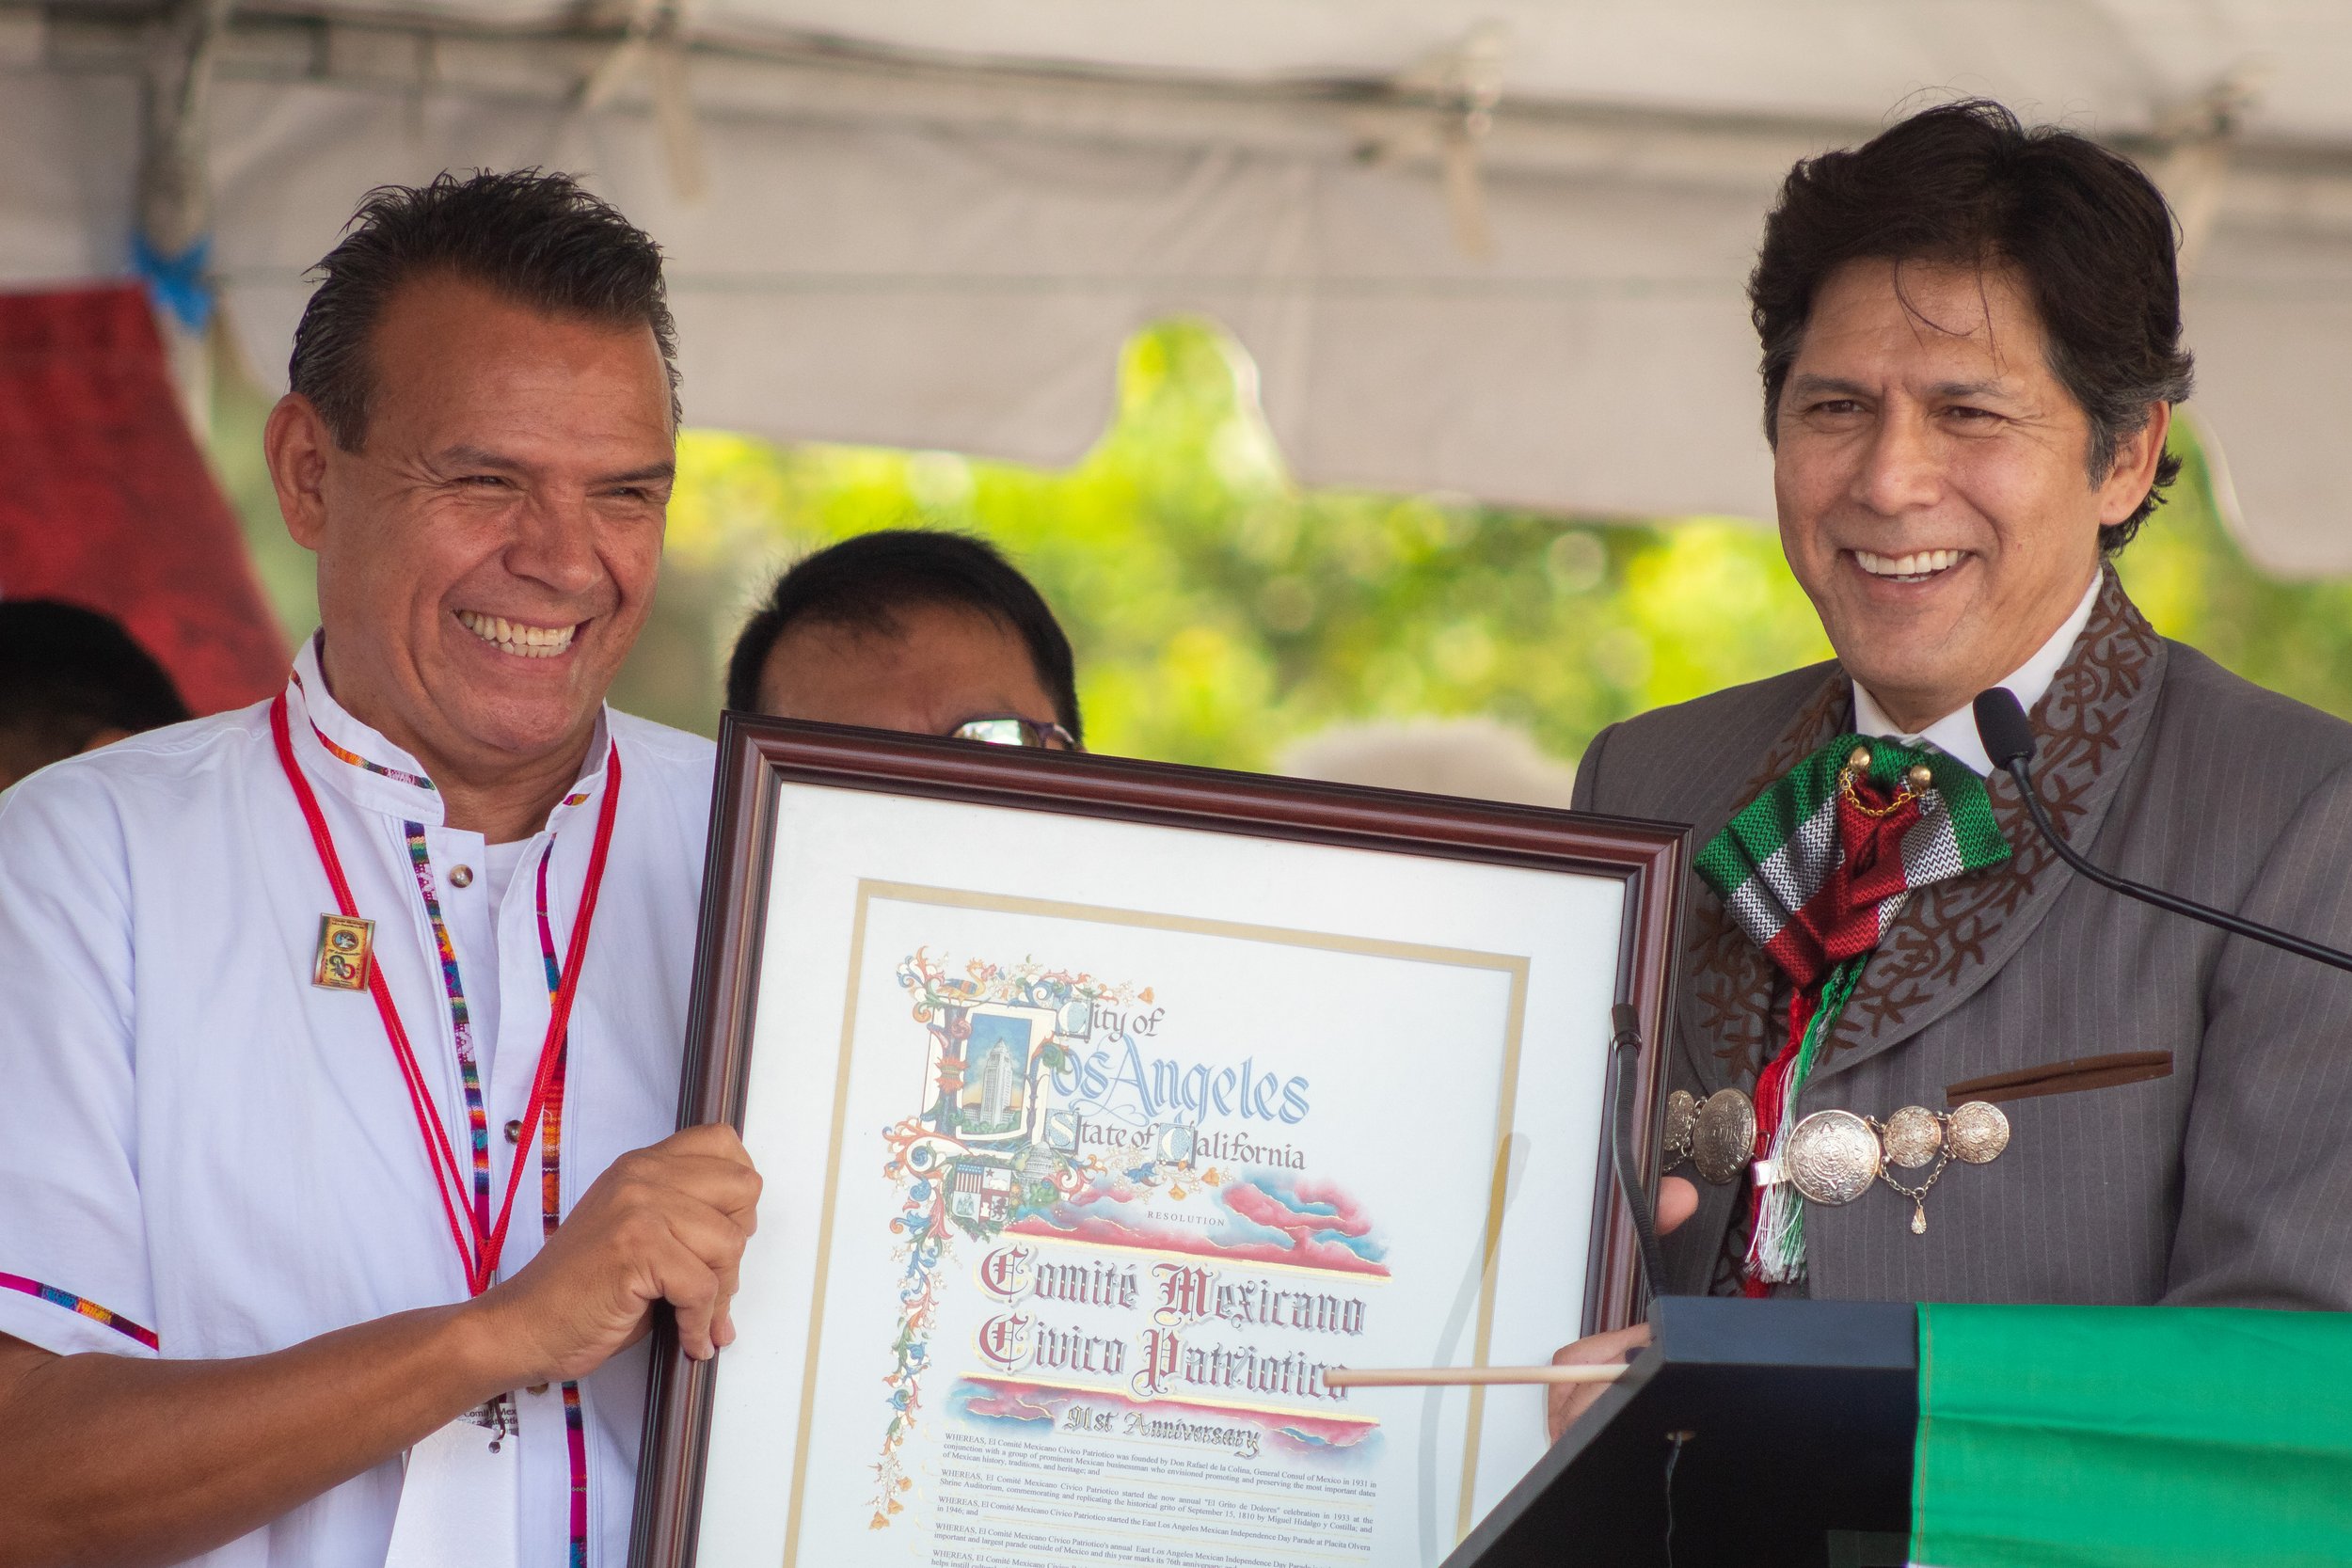  Francisco Moreno (right) receiving plaque commemorating the Comité Mexicano Civivo Patriotico 91st anniversary from Los Angeles City Council member Kevin De León (district 14) at the Mexican Independence Day Parade & Festival in East Los Angeles, Ca